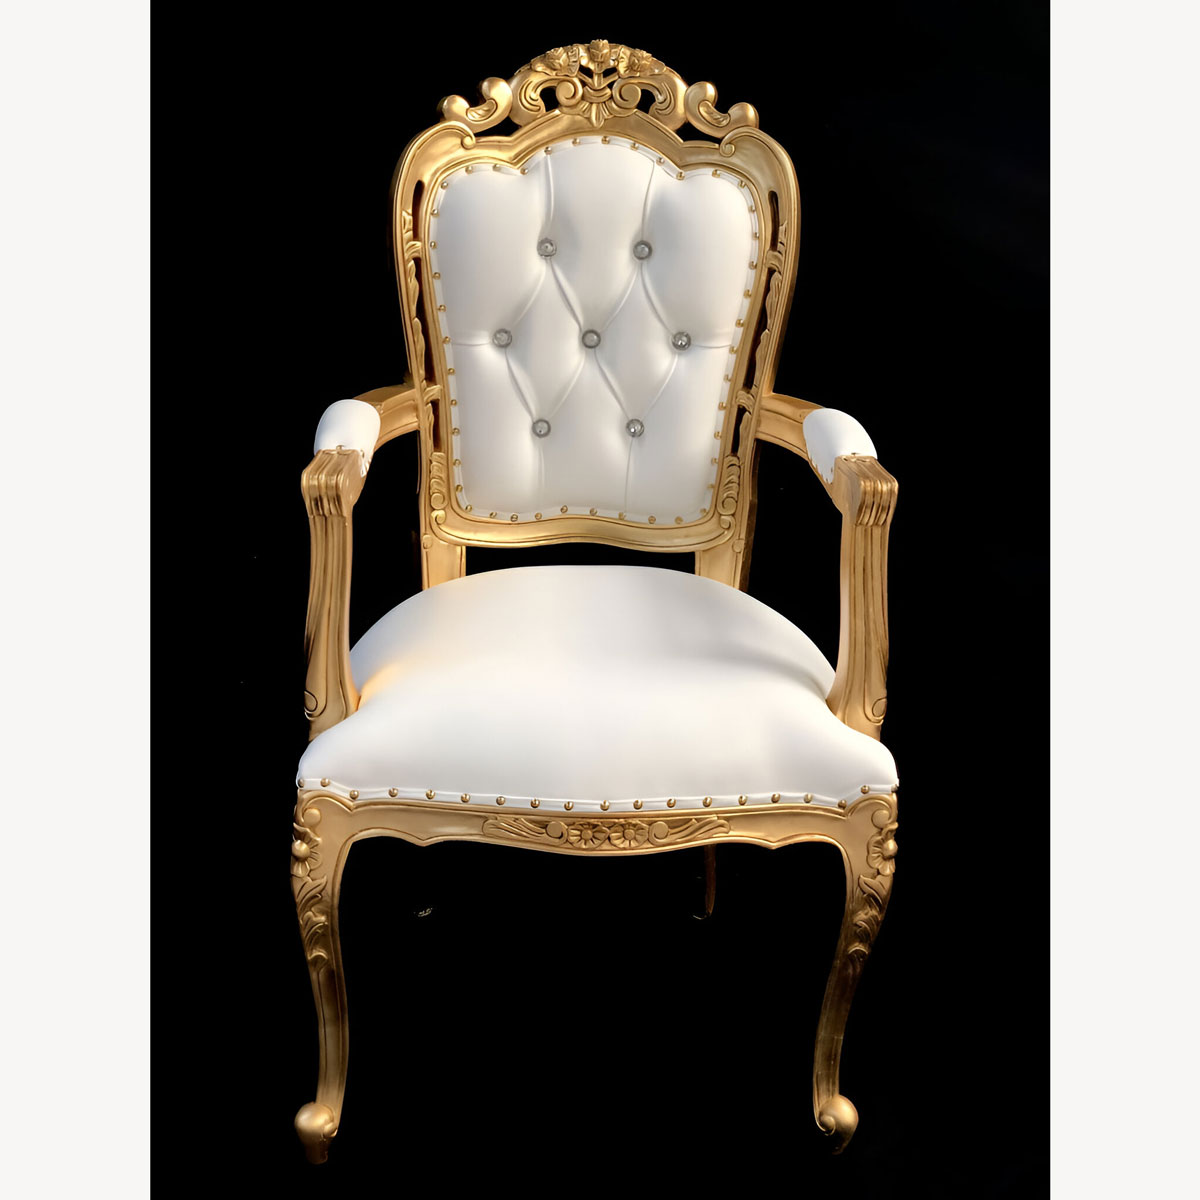 Franciscan Wedding Or Dining Chair Gold Leaf With White Faux Leather With Crystal Buttons 1 - Hampshire Barn Interiors - Home - Hampshire Barn Interiors News